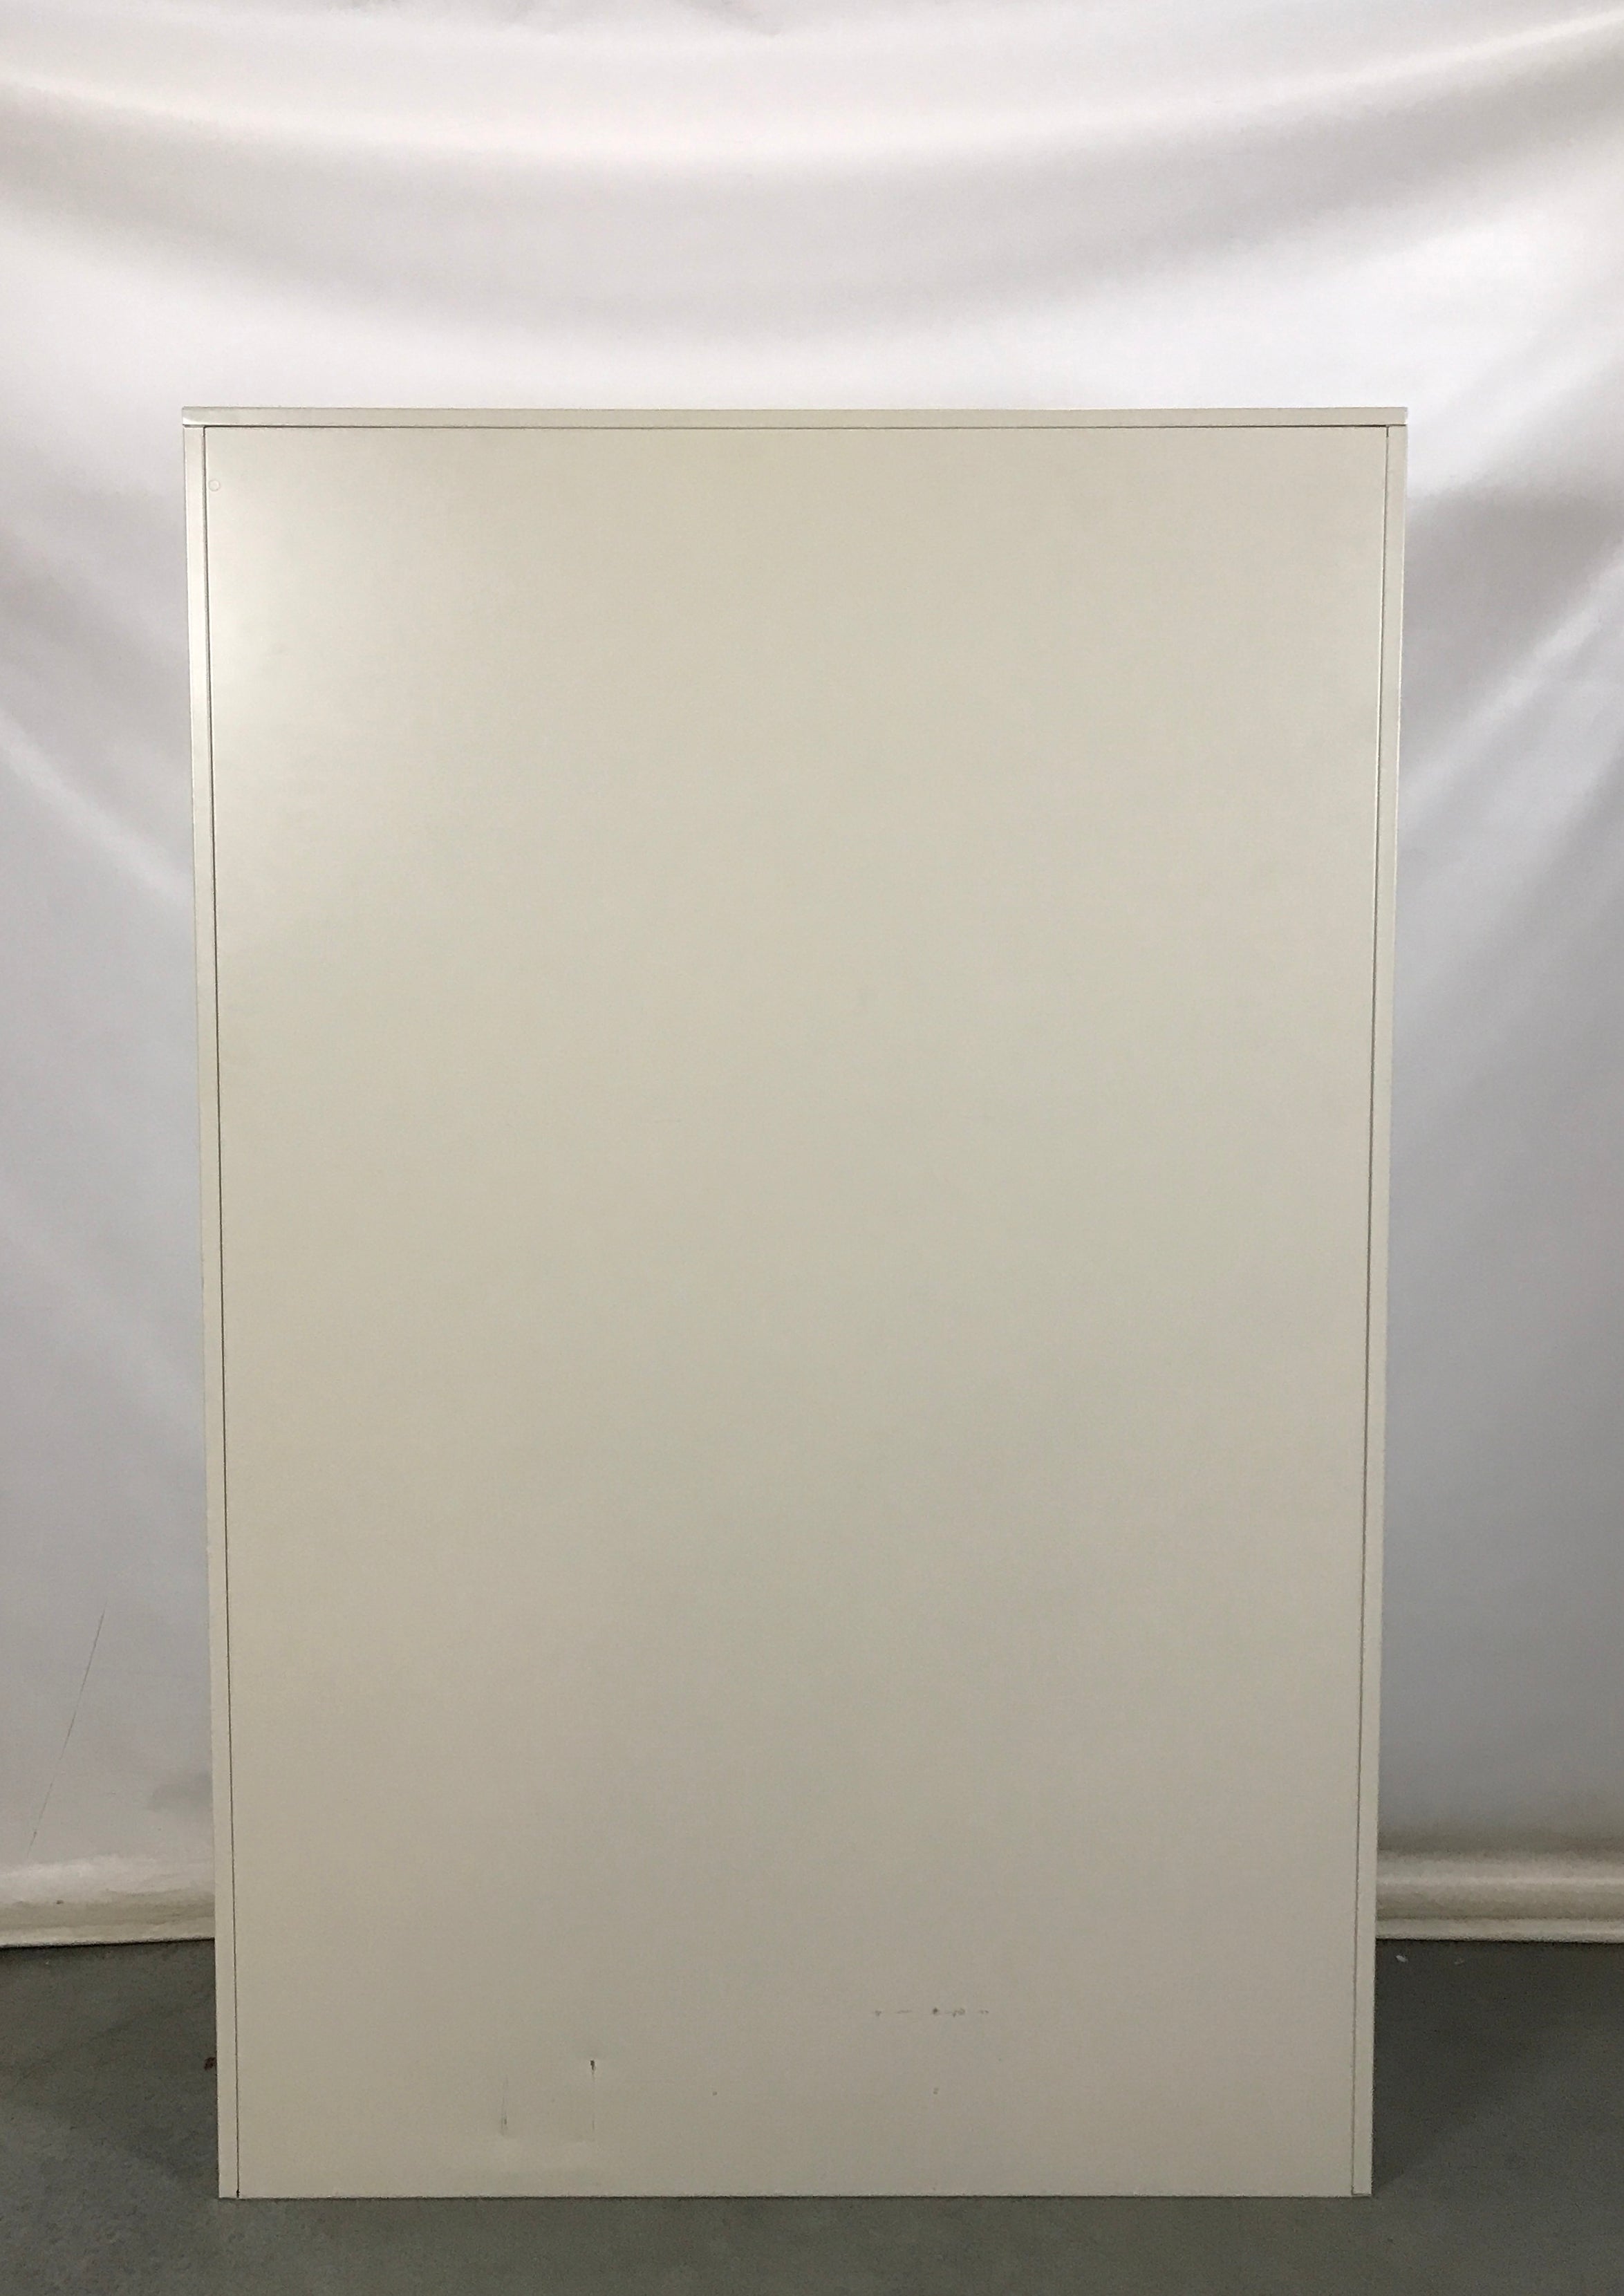 Beige Lateral File Cabinet